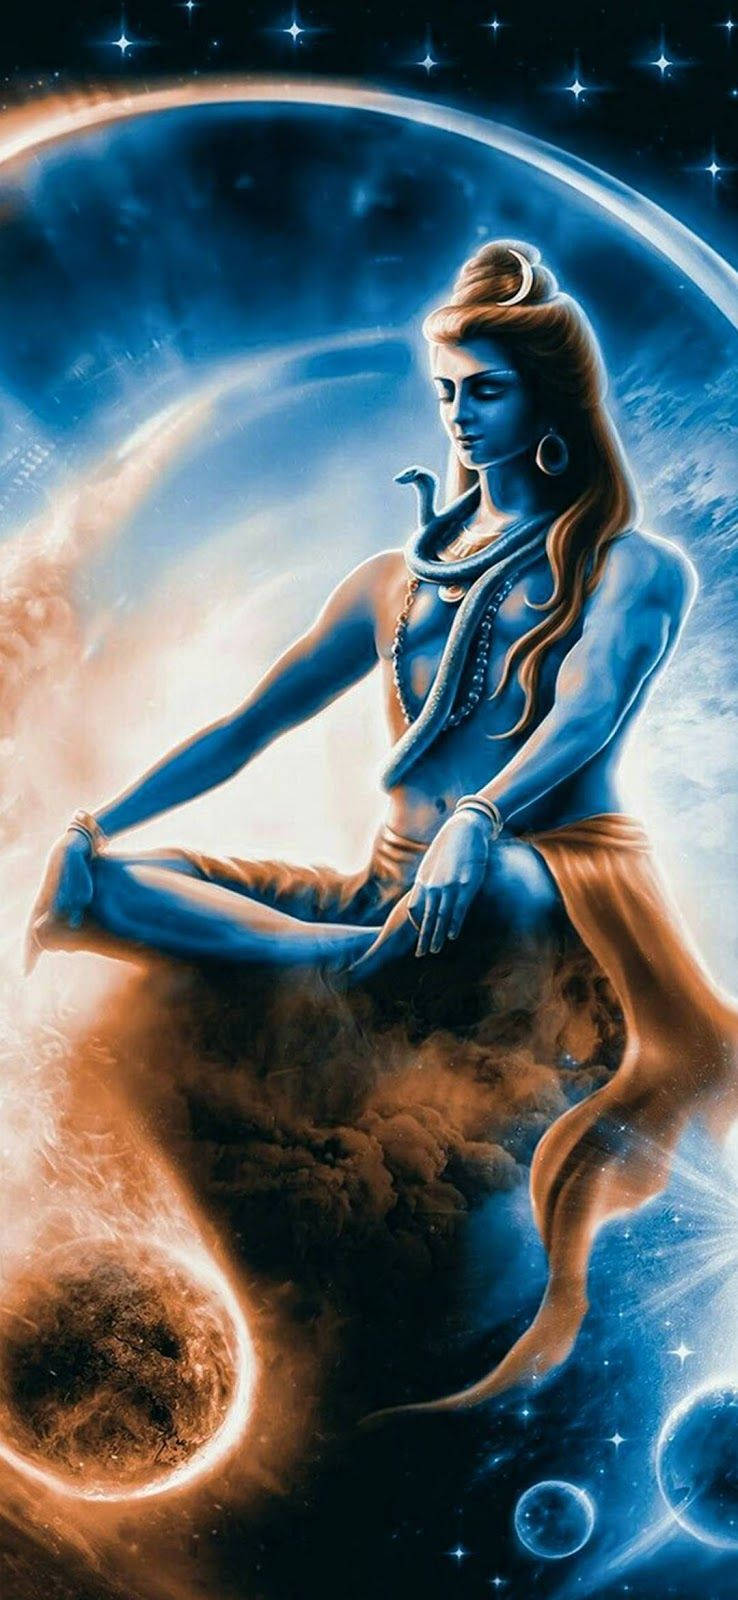 Download Lord Shiva Mobile Meditating In Space Wallpaper ...